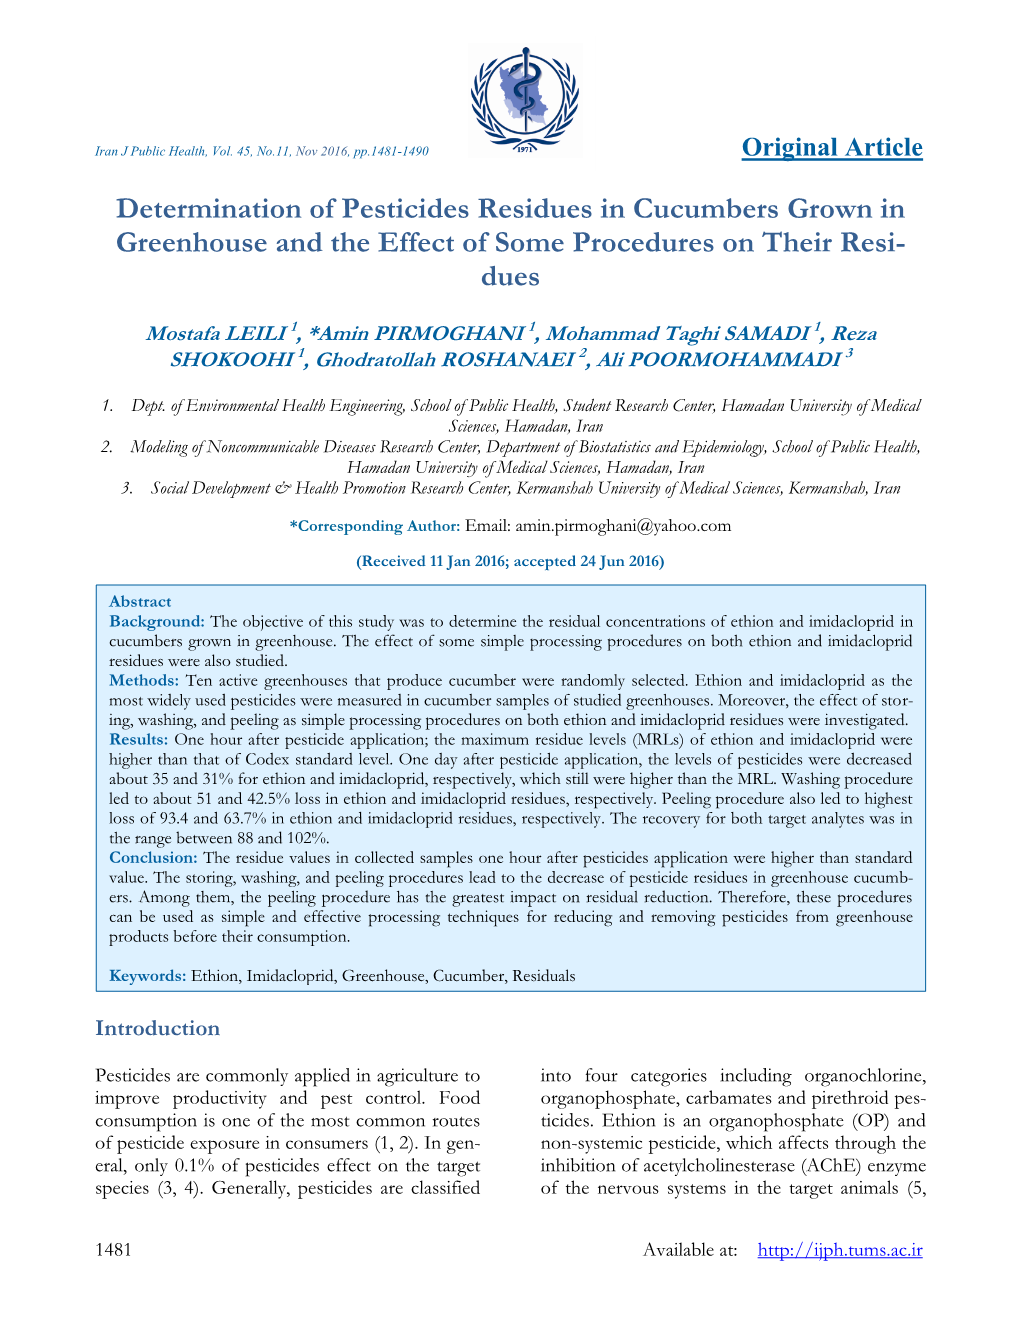 Determination of Pesticides Residues in Cucumbers Grown in Greenhouse and the Effect of Some Procedures on Their Resi- Dues